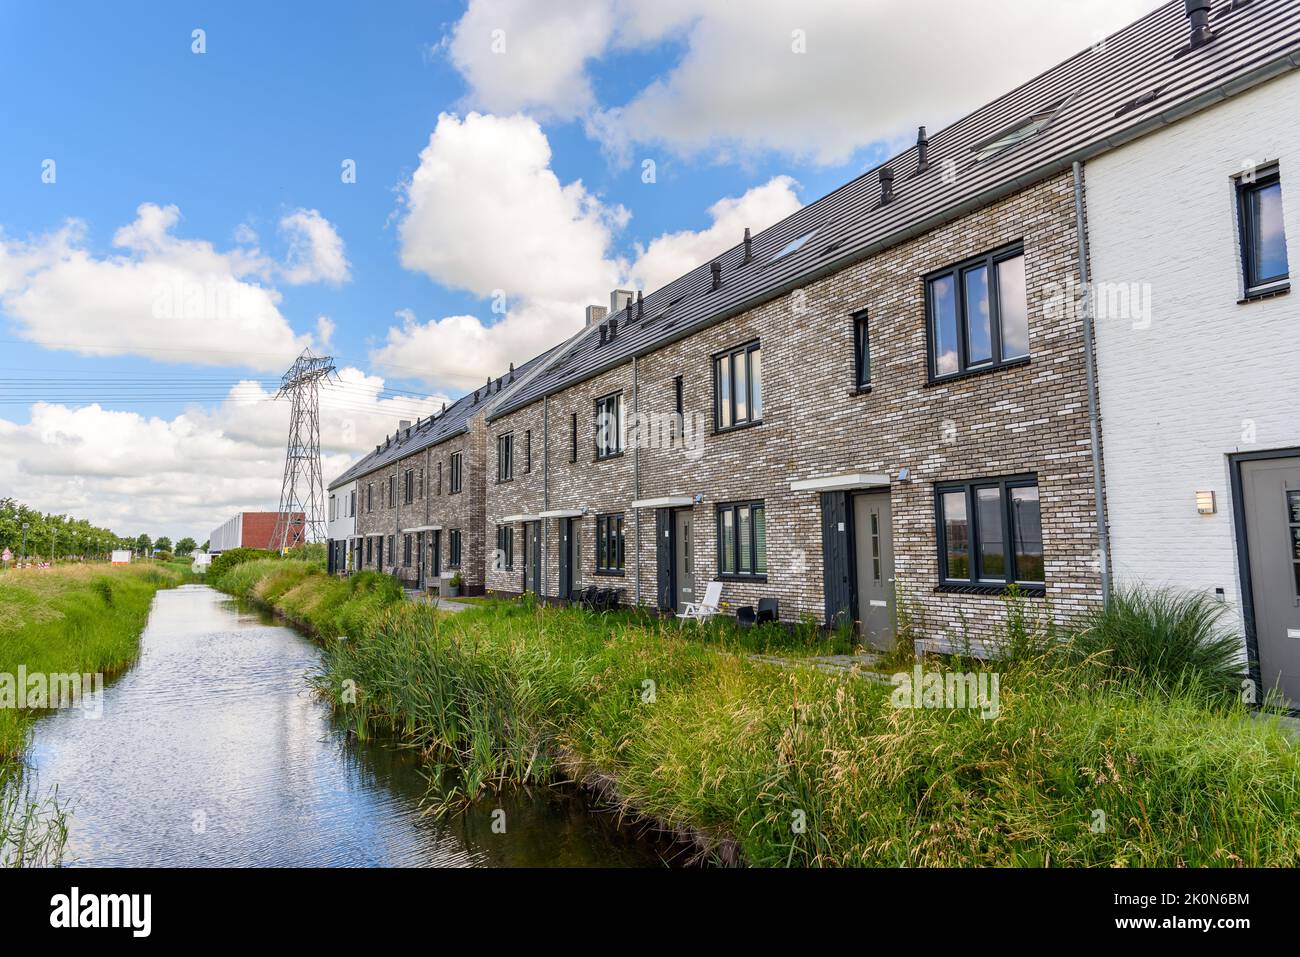 Row of new brick terraced houses along a canal in a suburban housing development on a sunny summer day Stock Photo